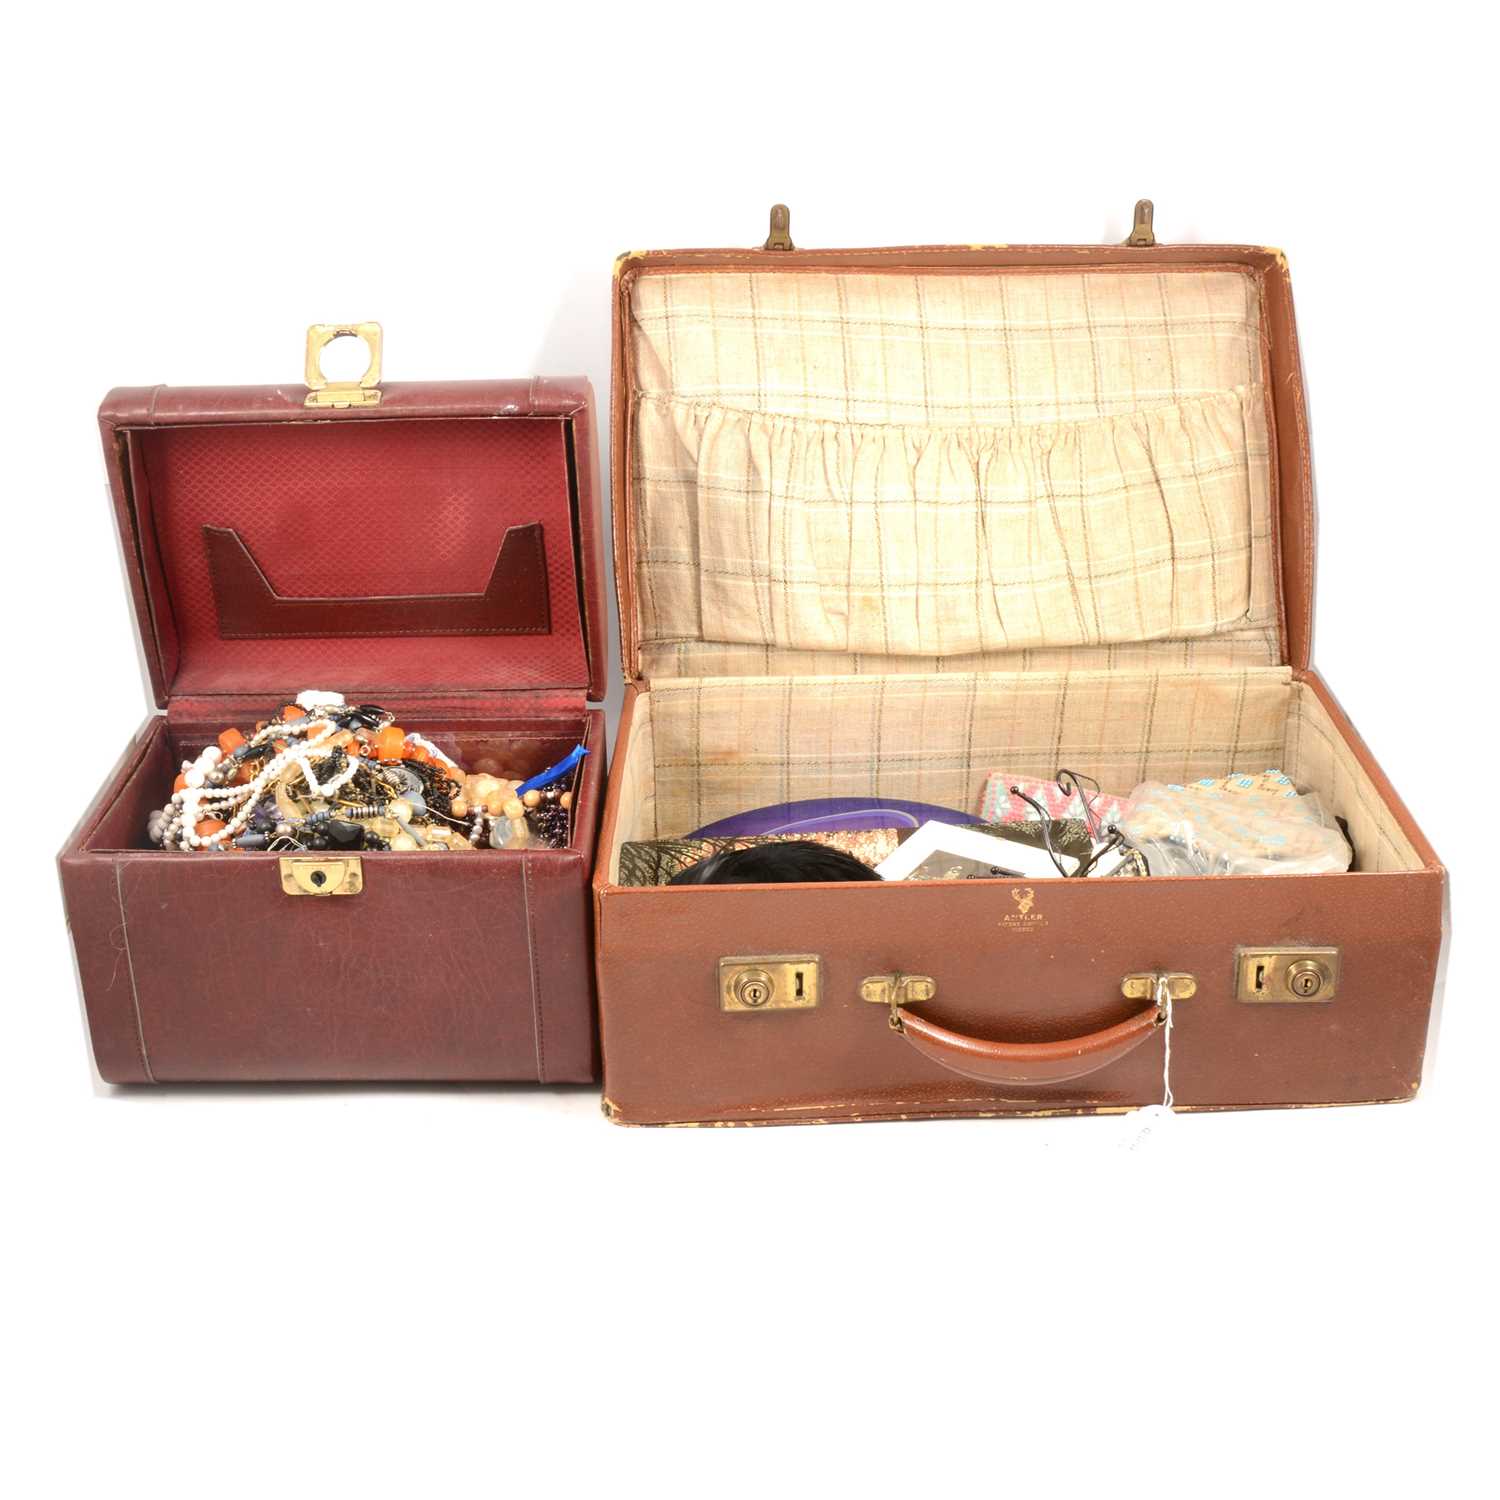 Lot 217 - Costume jewellery necklaces, bracelets, old coins, Astor-Safe jewellery box and vintage suitcase.